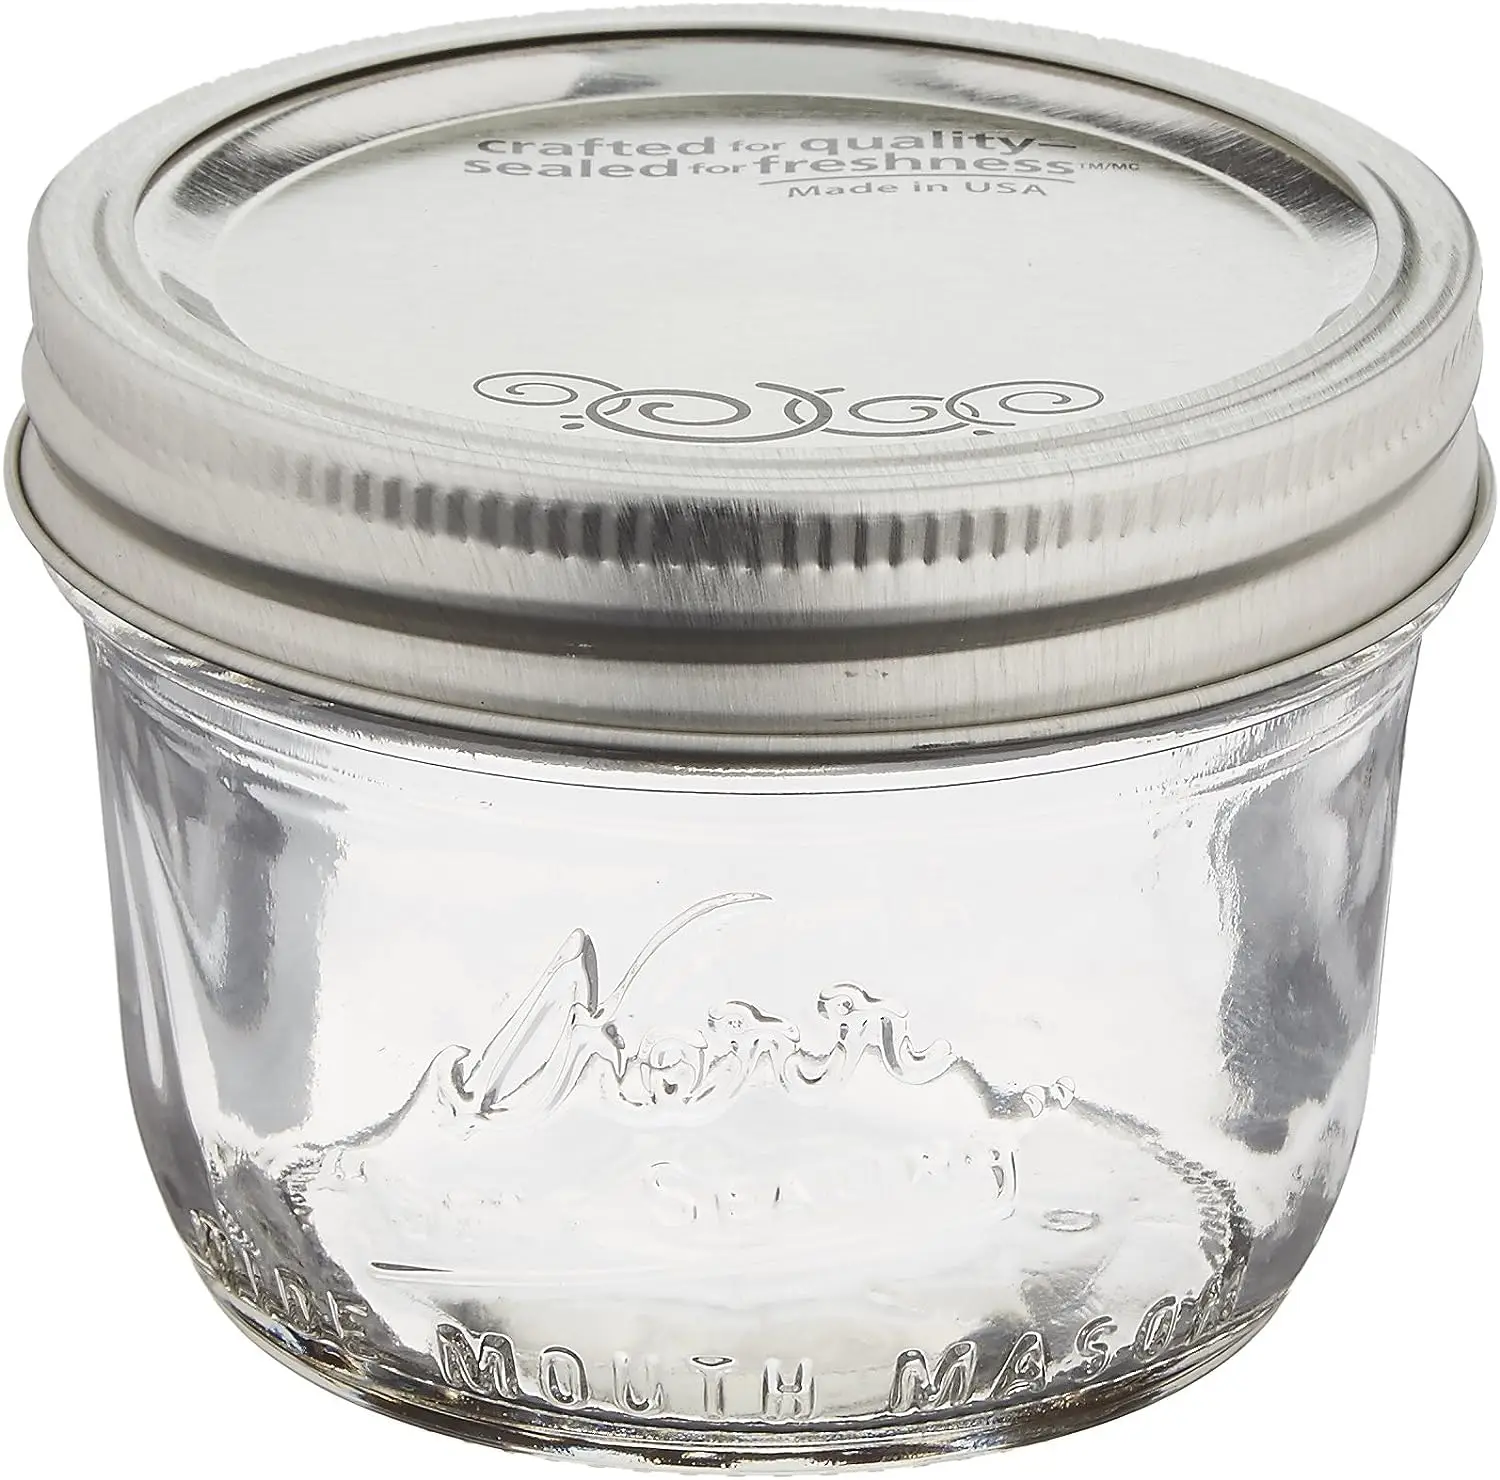 https://ae01.alicdn.com/kf/Se1b96053735446d79c006bc25374fb689/Wide-Mouth-Half-Pint-Glass-Mason-Jars-8-Ounces-with-Lids-and-Bands-12-Count-per.jpg